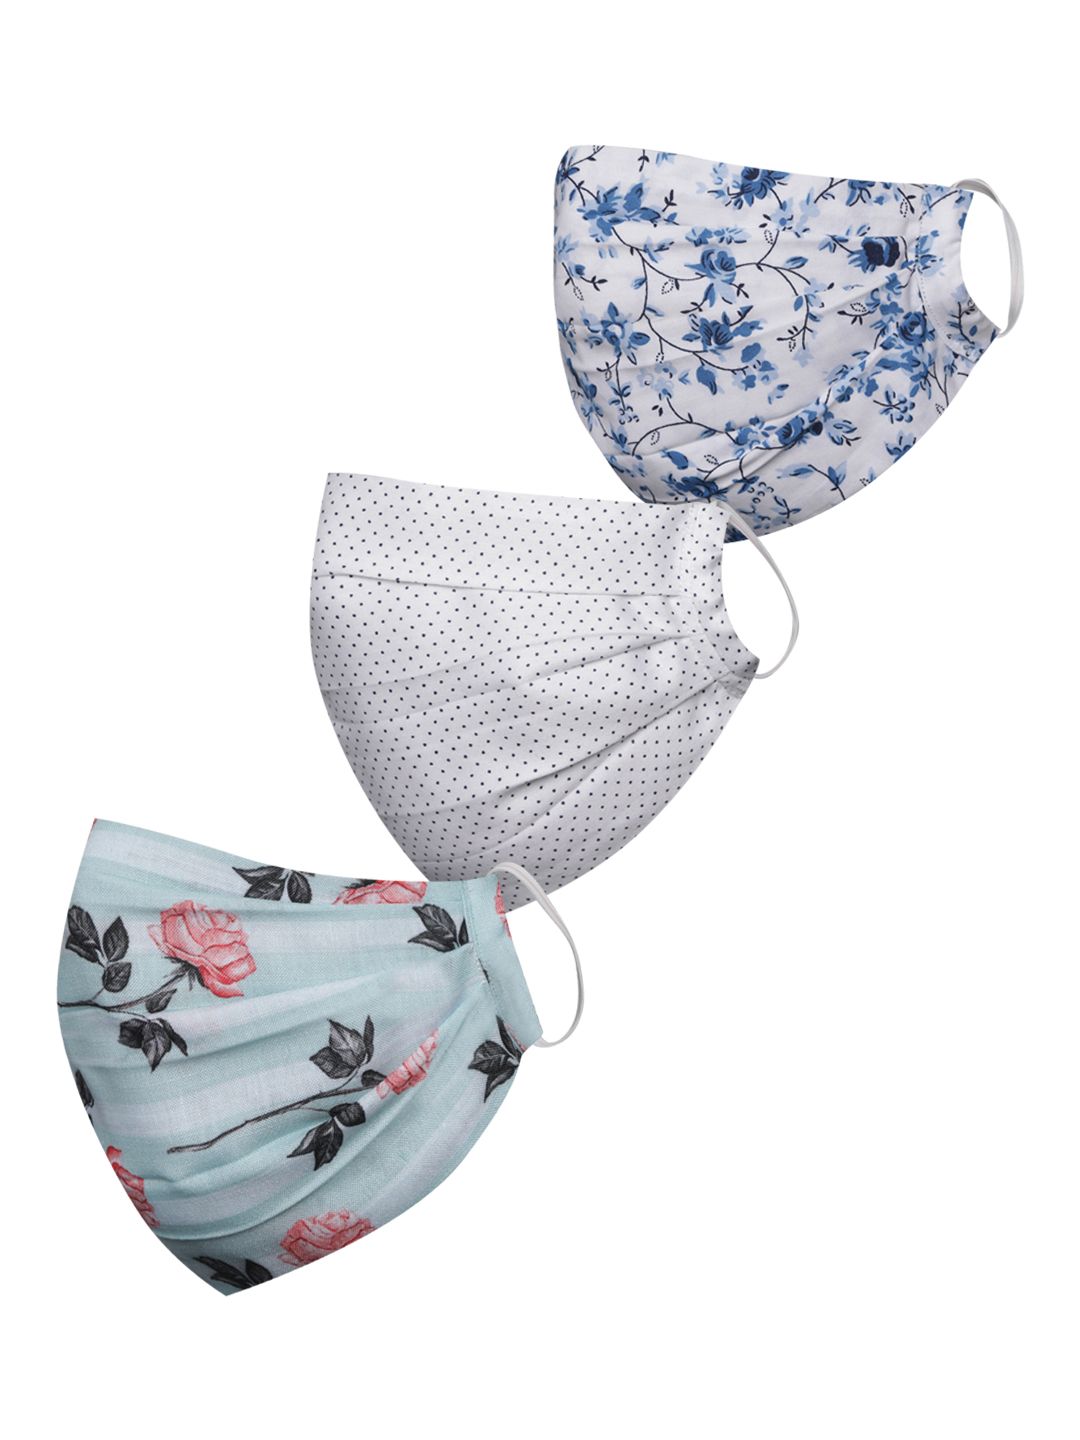 VASTRAMAY Unisex Set of 3 Printed 2-Ply Reusable Protective Outdoor Face Masks Price in India